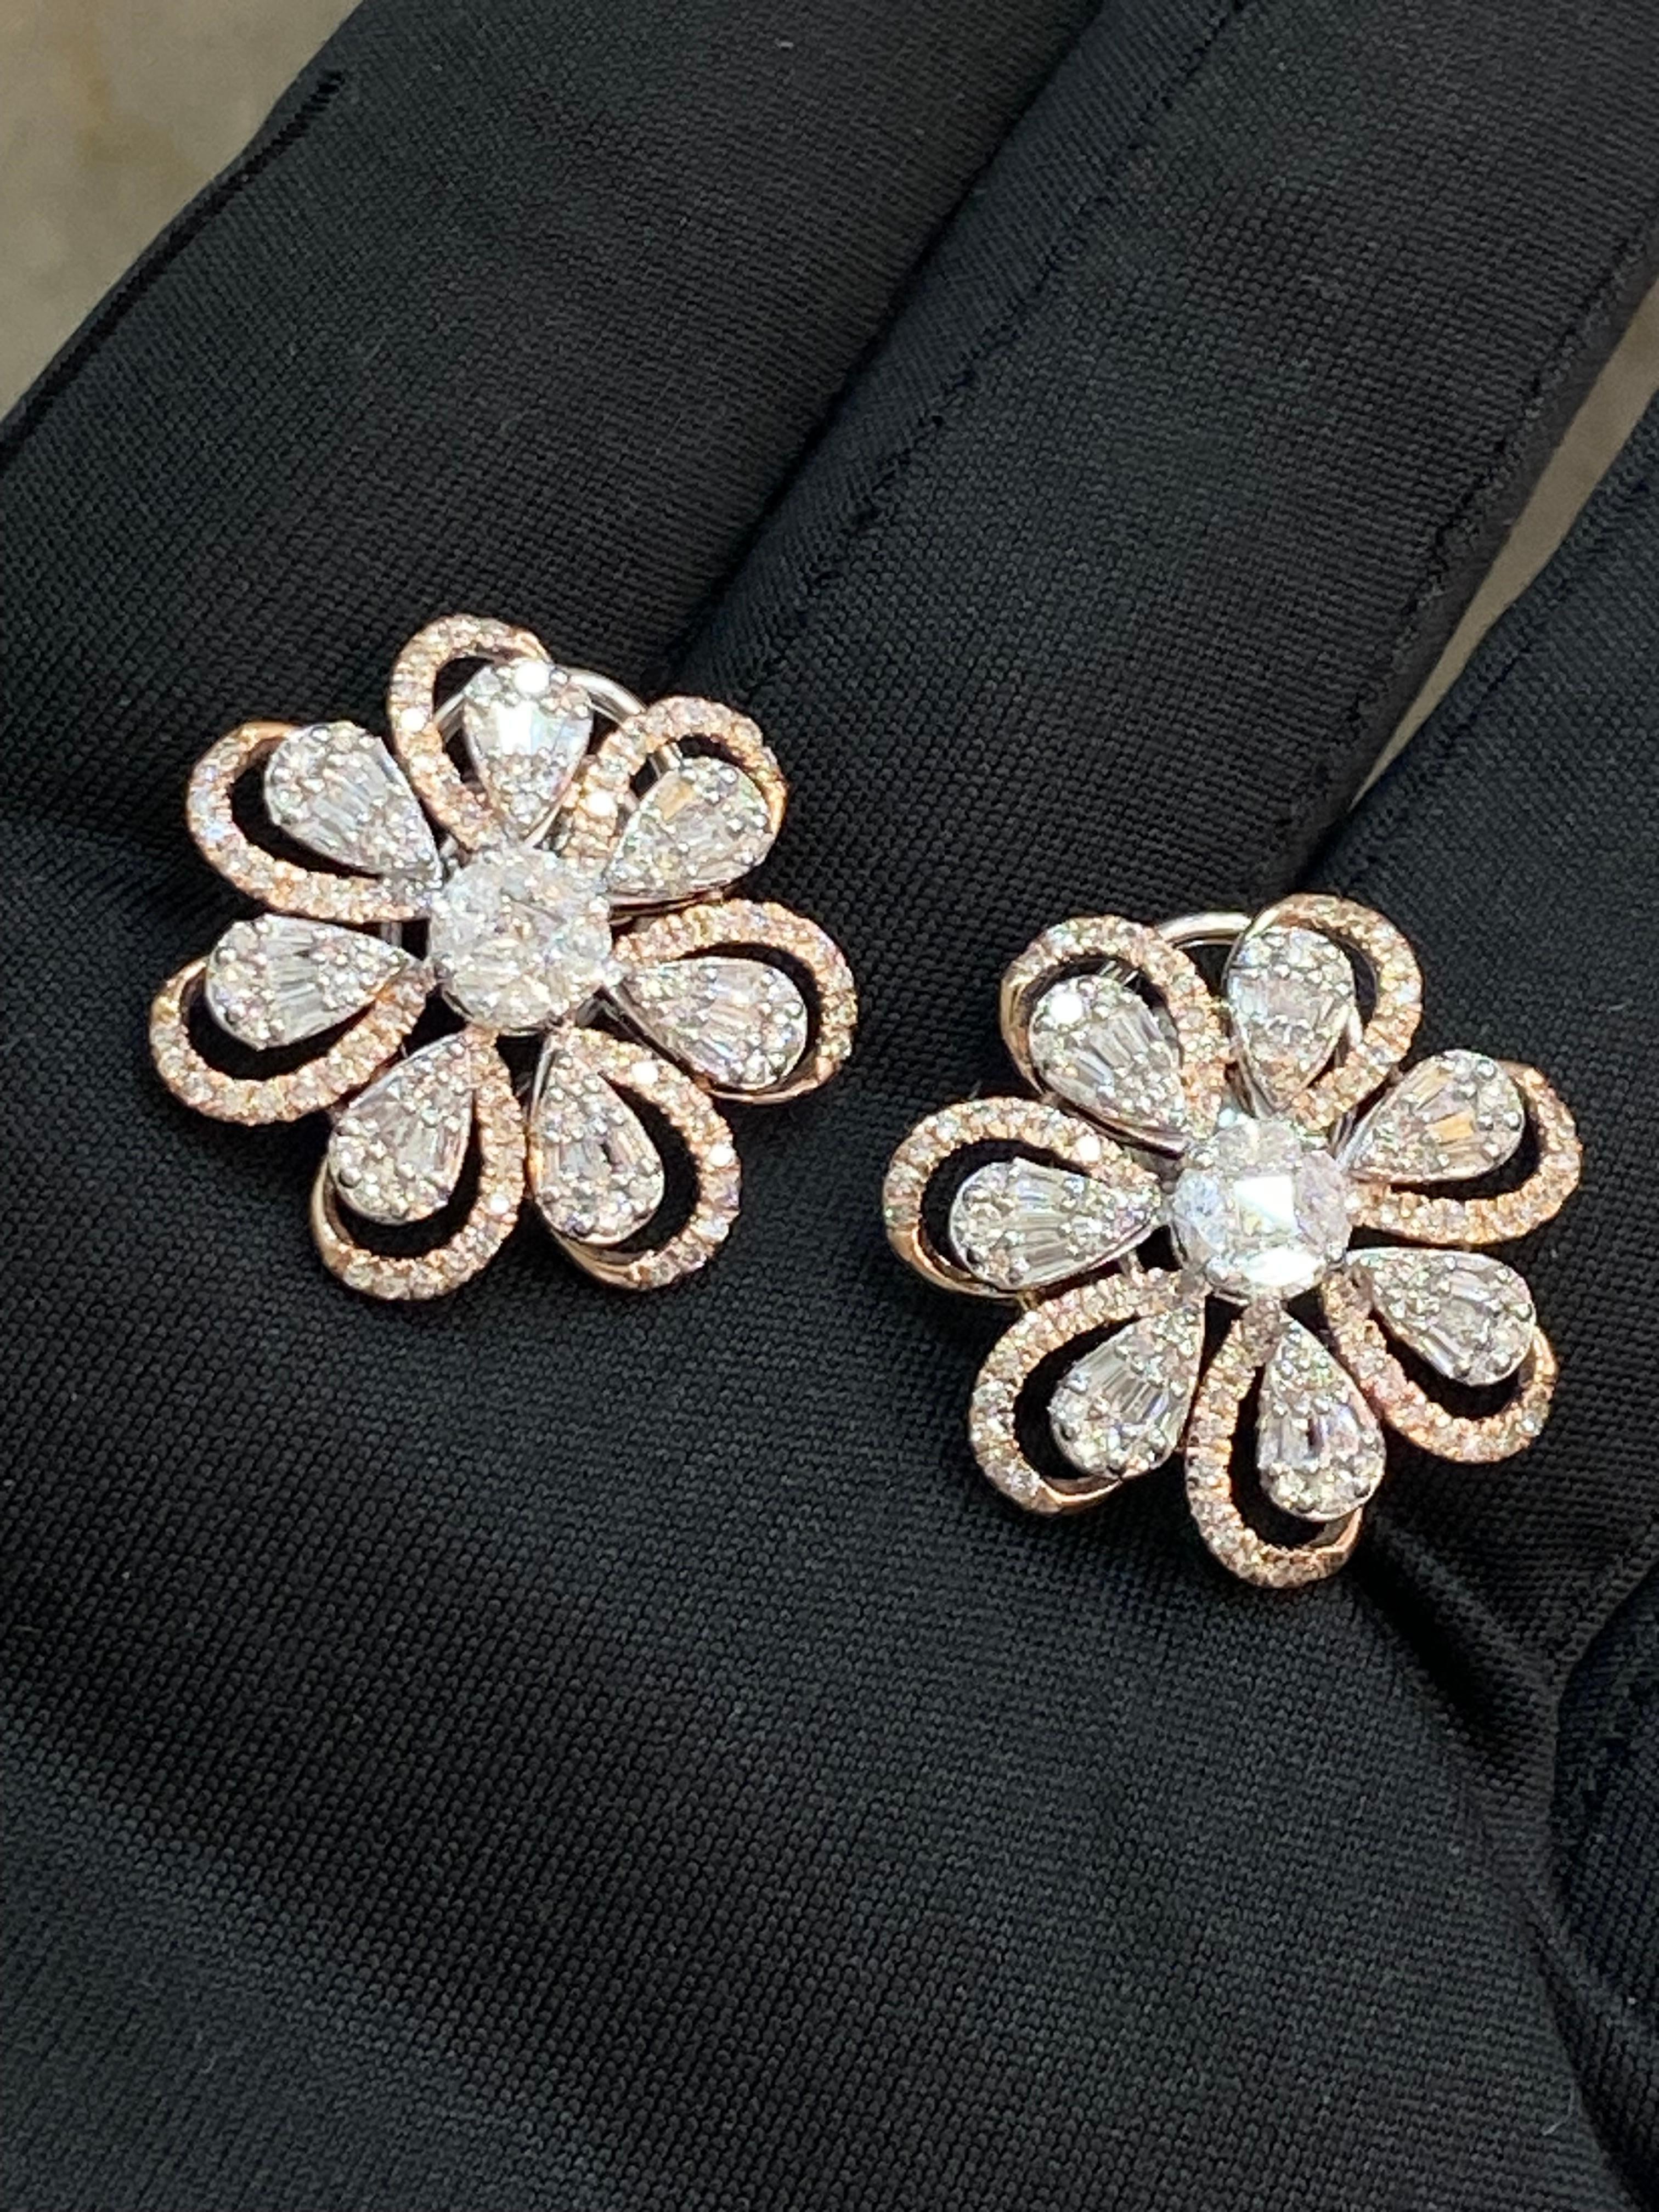 Experience glamour in its purest essence with these earrings. Treat yourself to the mesmerizing allure of these breathtaking 2.45 carat diamond earrings in 14k gold. Designed to bring joy and radiance, they are destined to adorn you with endless